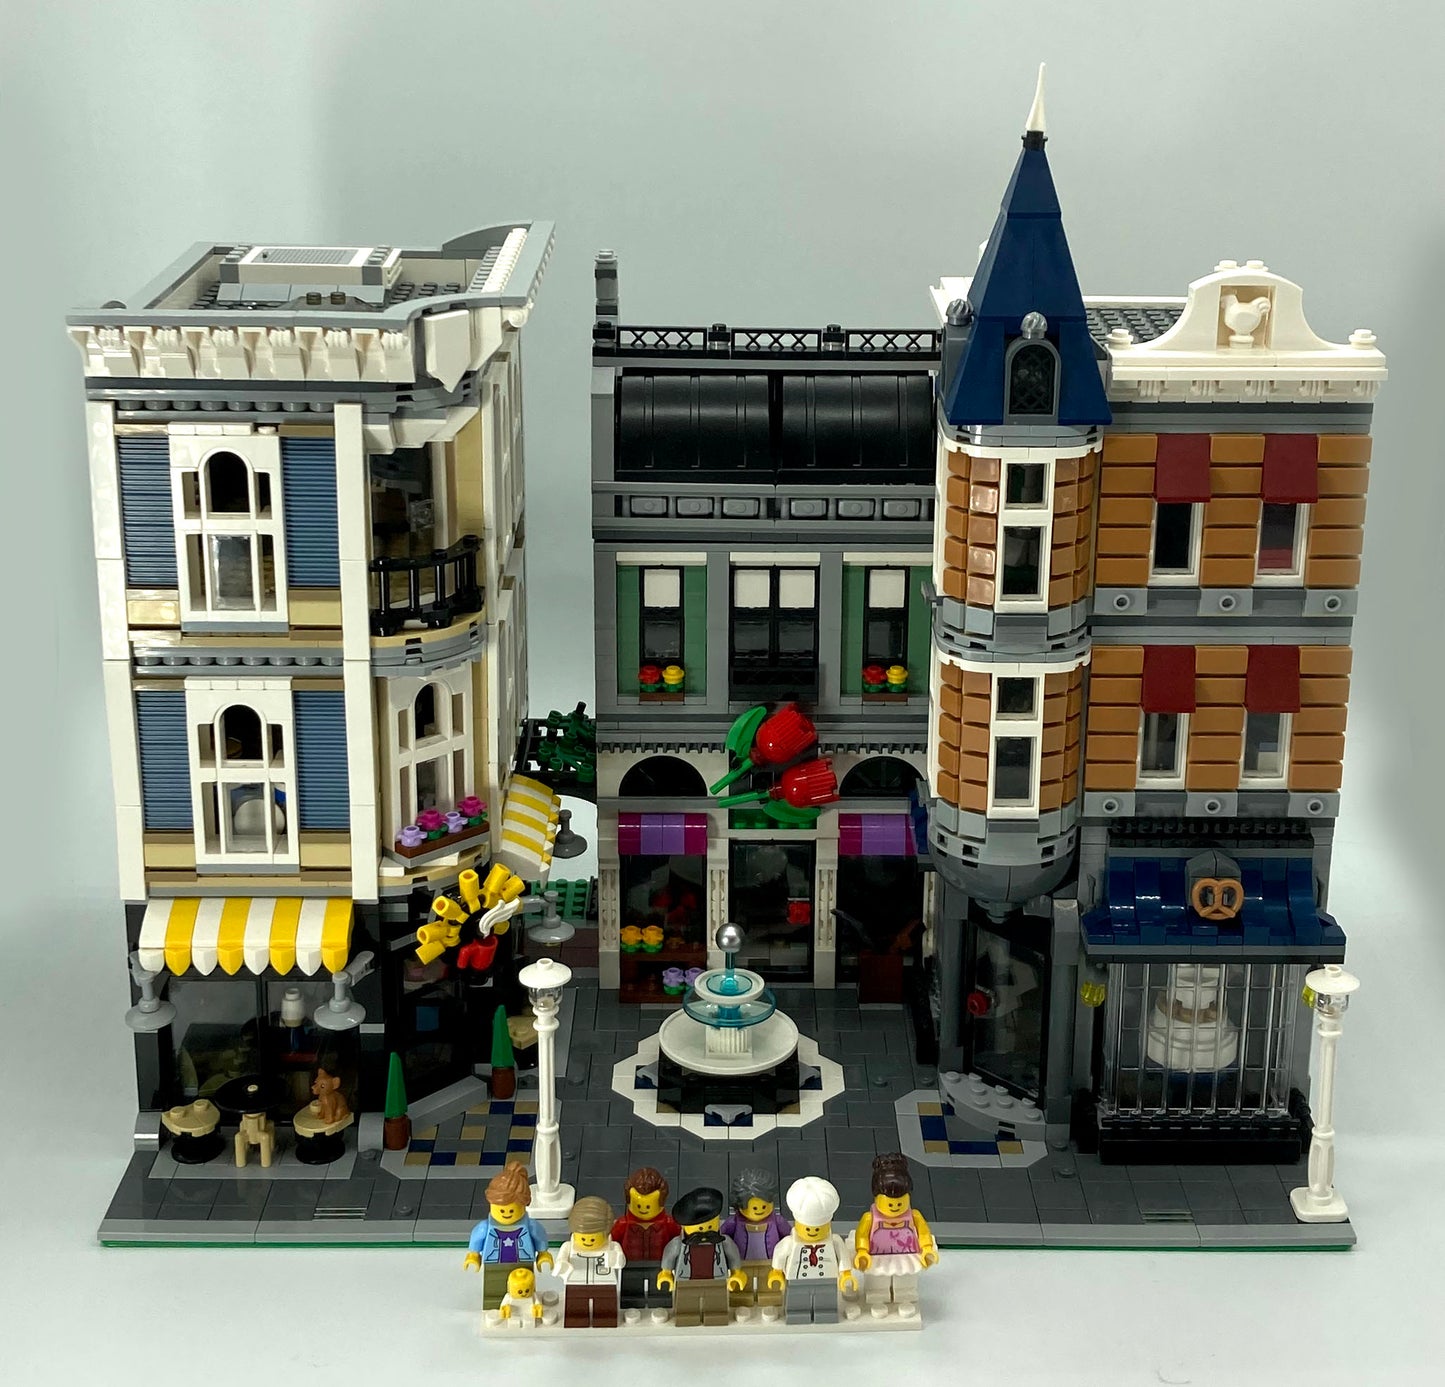 Used Set 10255 Assembly Square (No Instruction Manuals or Box)